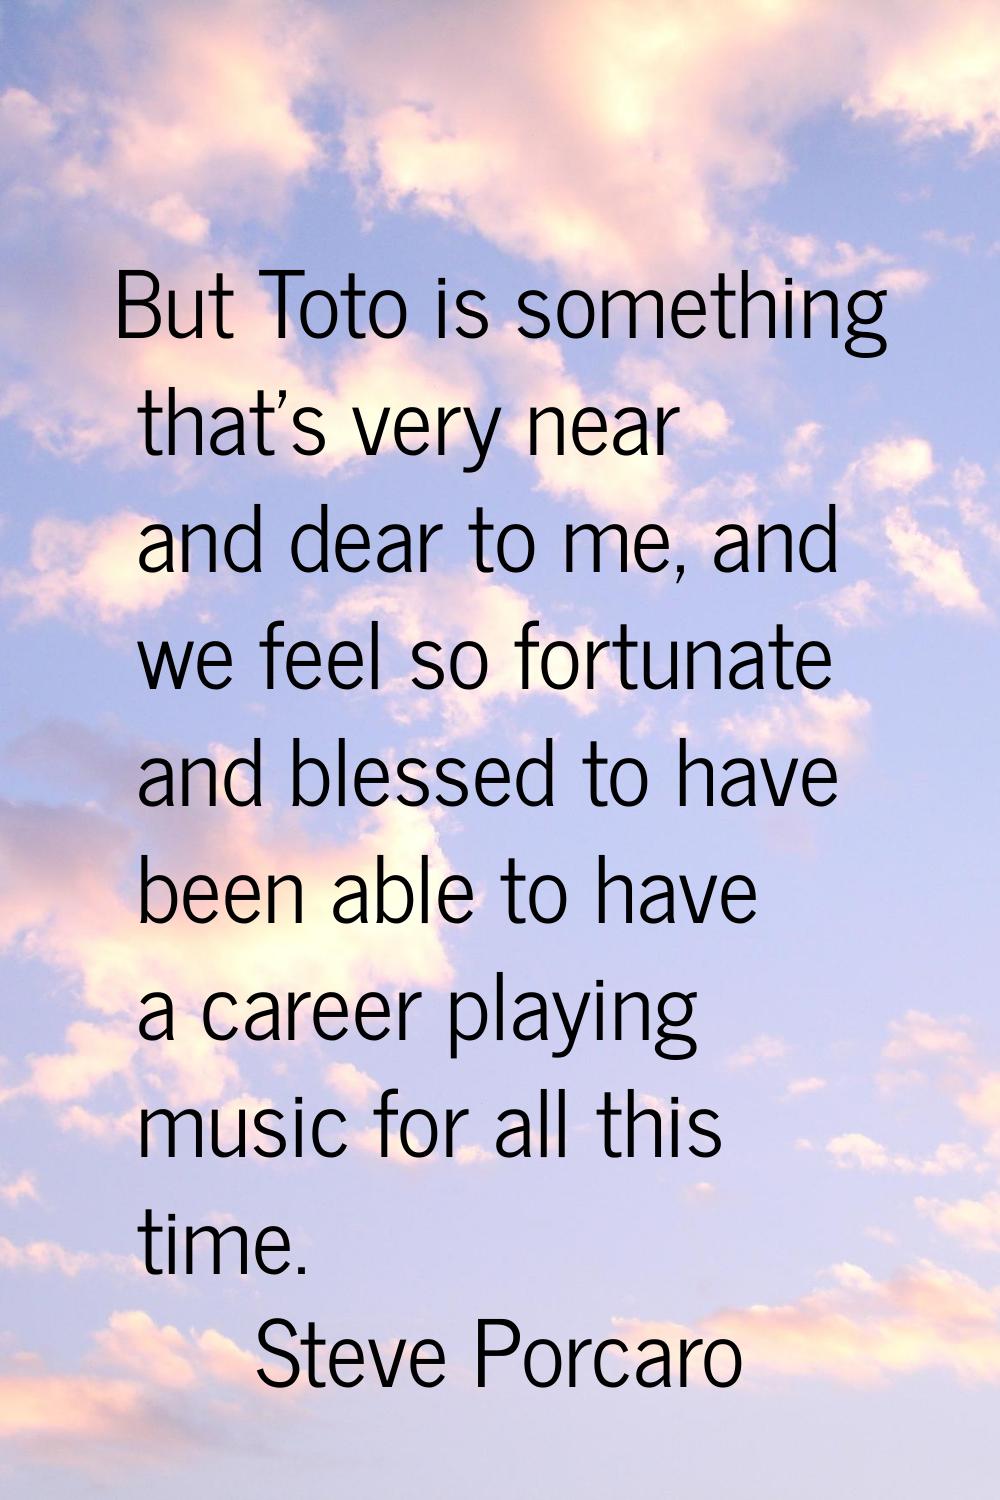 But Toto is something that's very near and dear to me, and we feel so fortunate and blessed to have